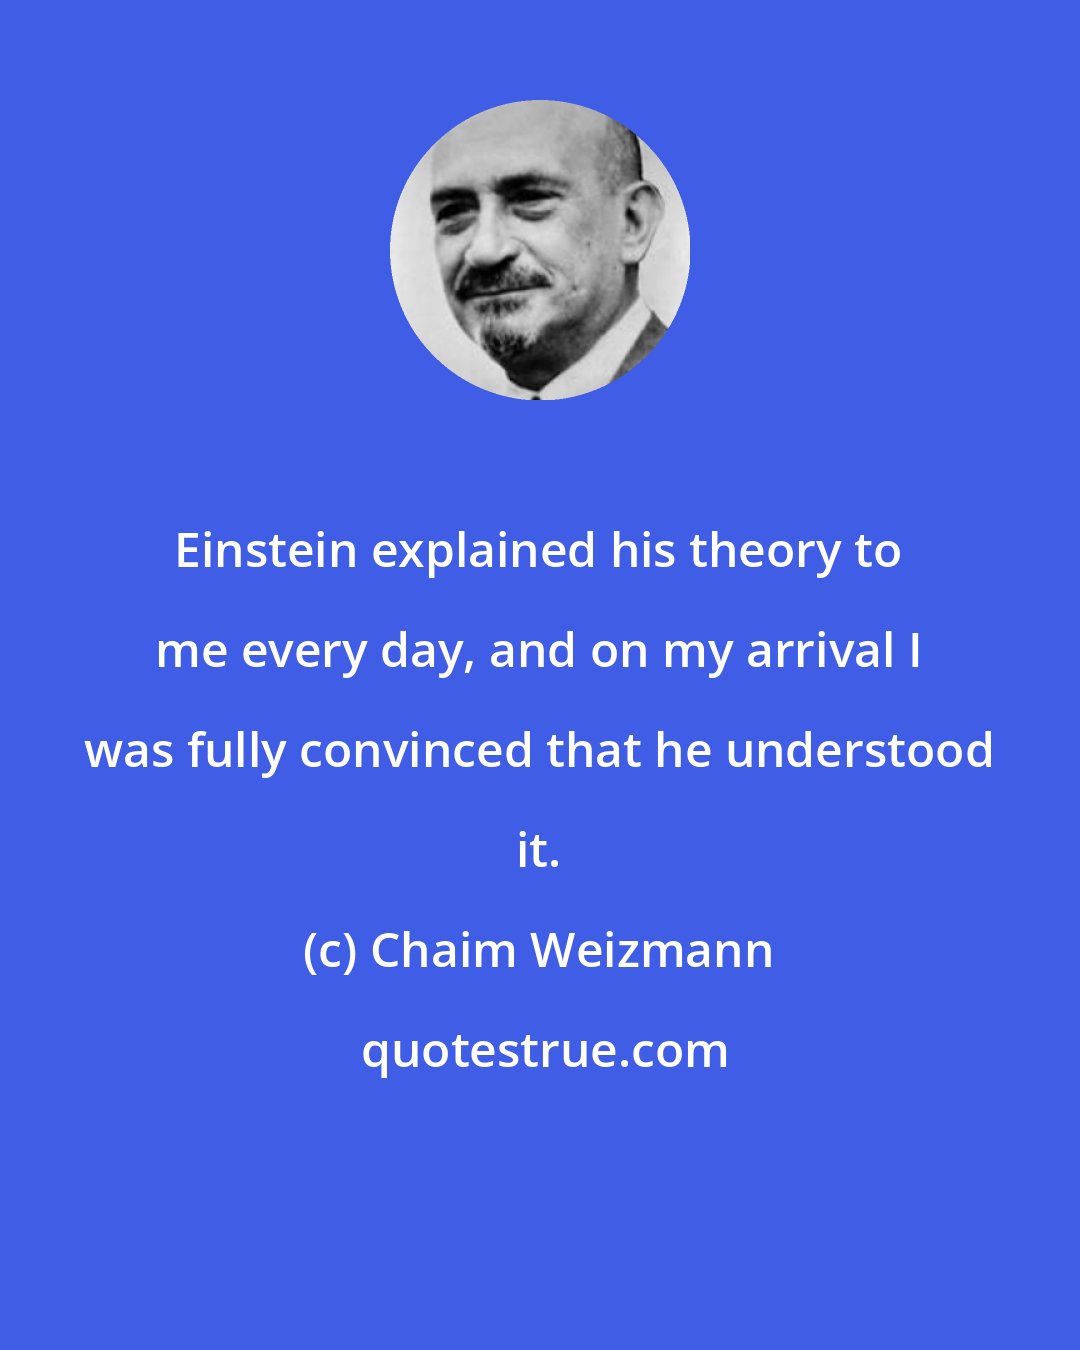 Chaim Weizmann: Einstein explained his theory to me every day, and on my arrival I was fully convinced that he understood it.